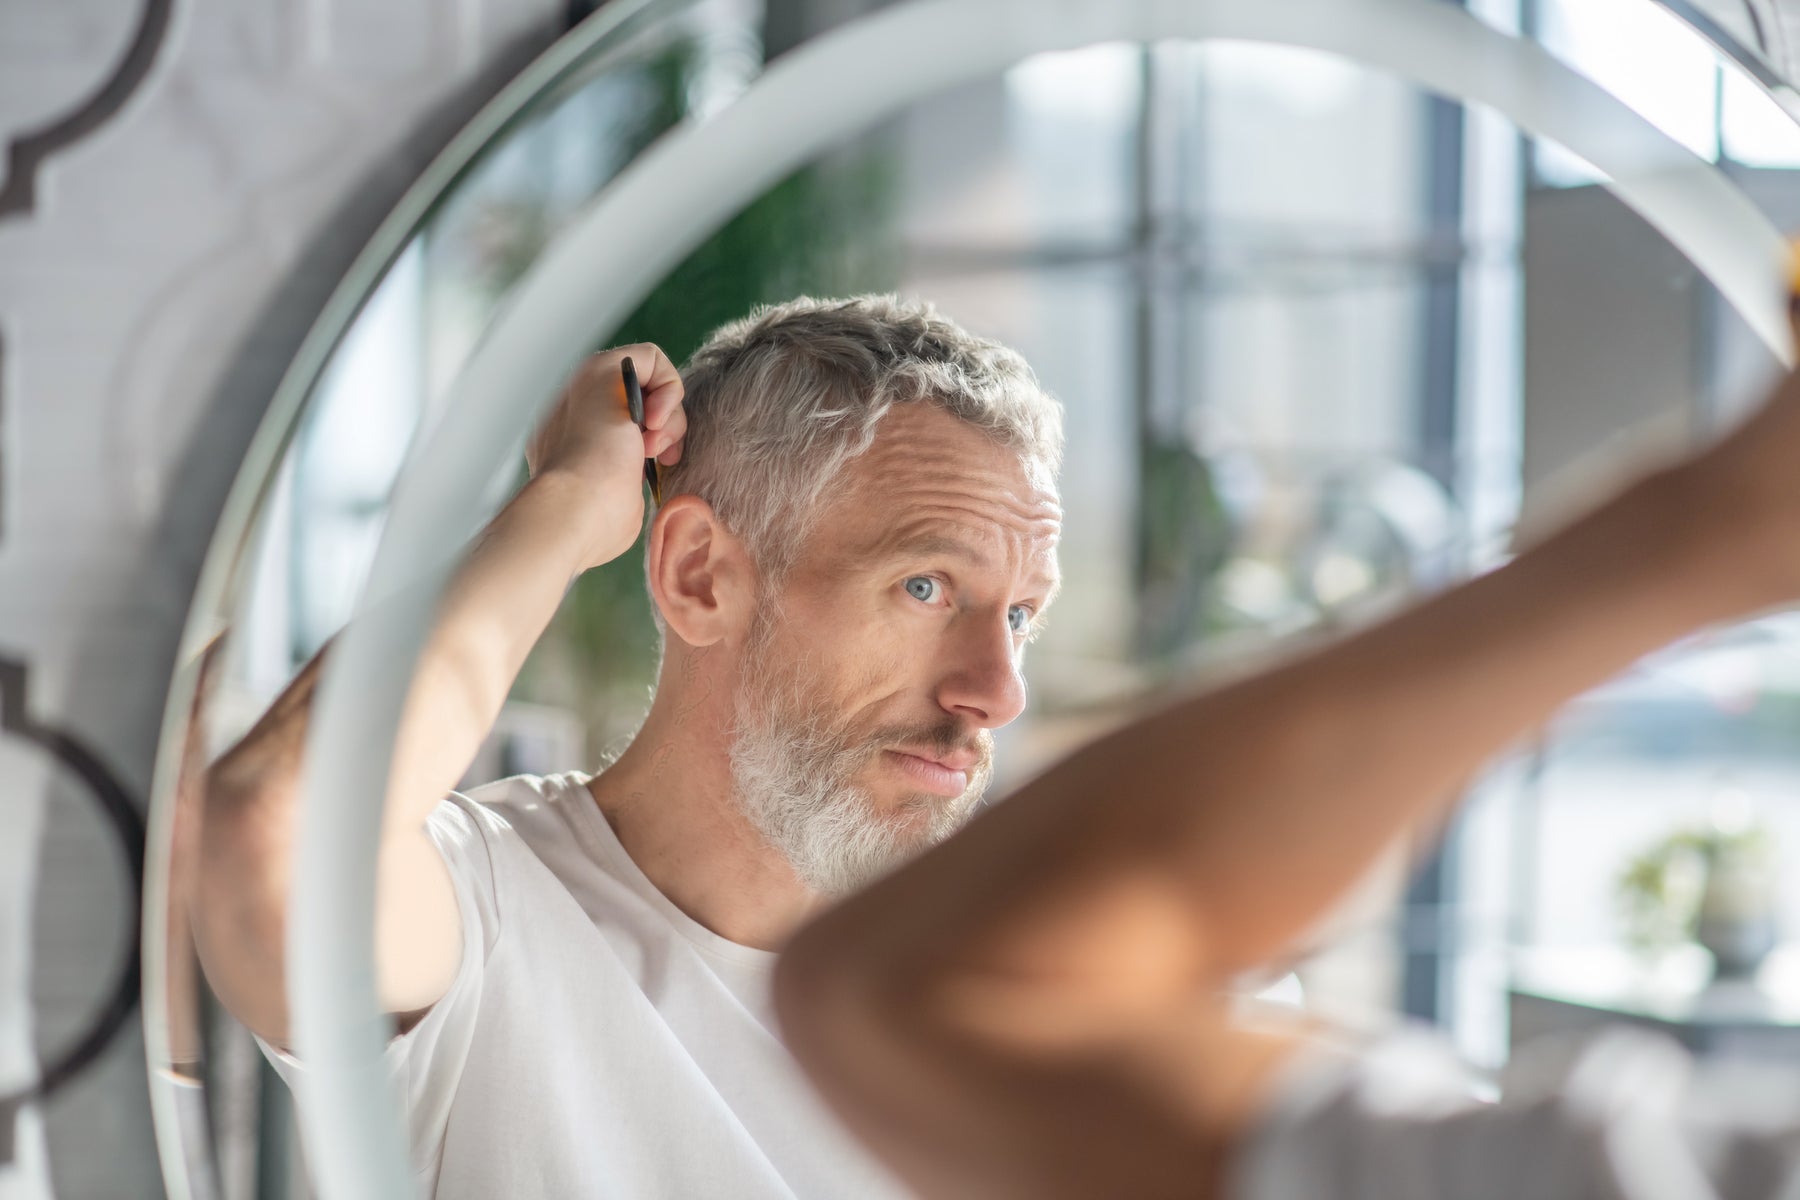 Creating a hairstyle. A man combing his hair in the morning